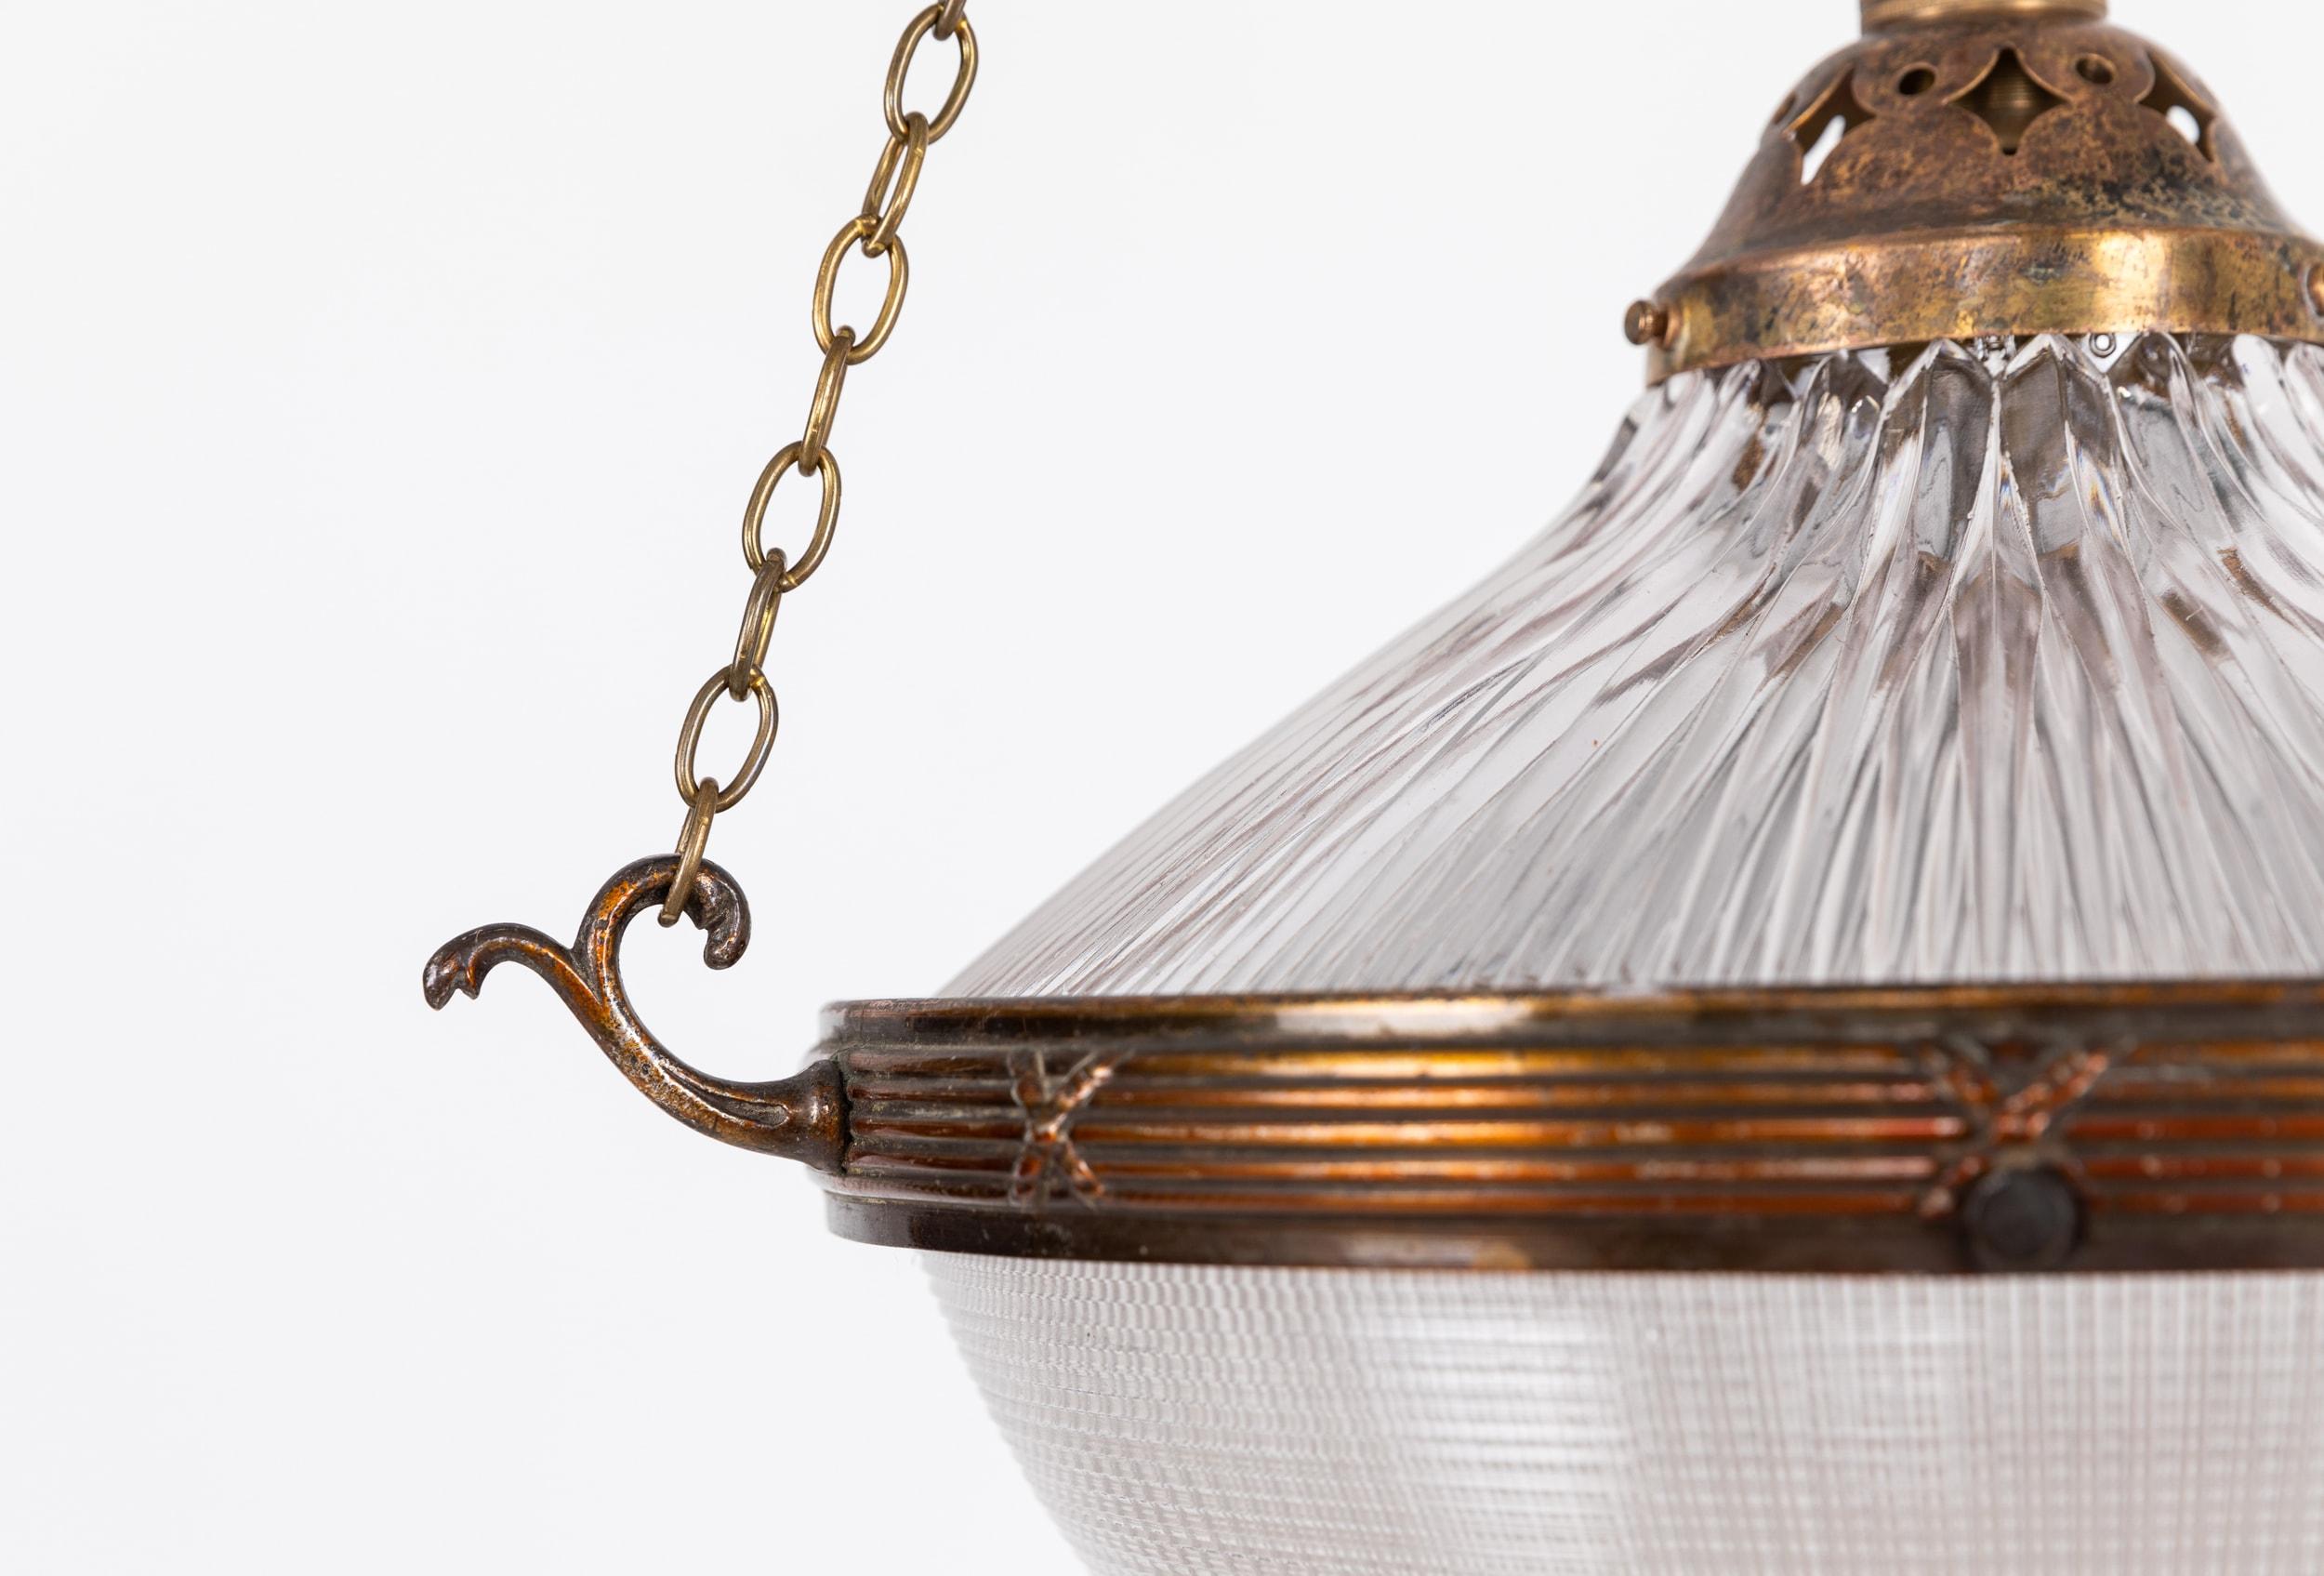 An incredible 'Blondel Stiletto' pendant light made in England by Holophane. c.1920

Comprising of prismatic 12